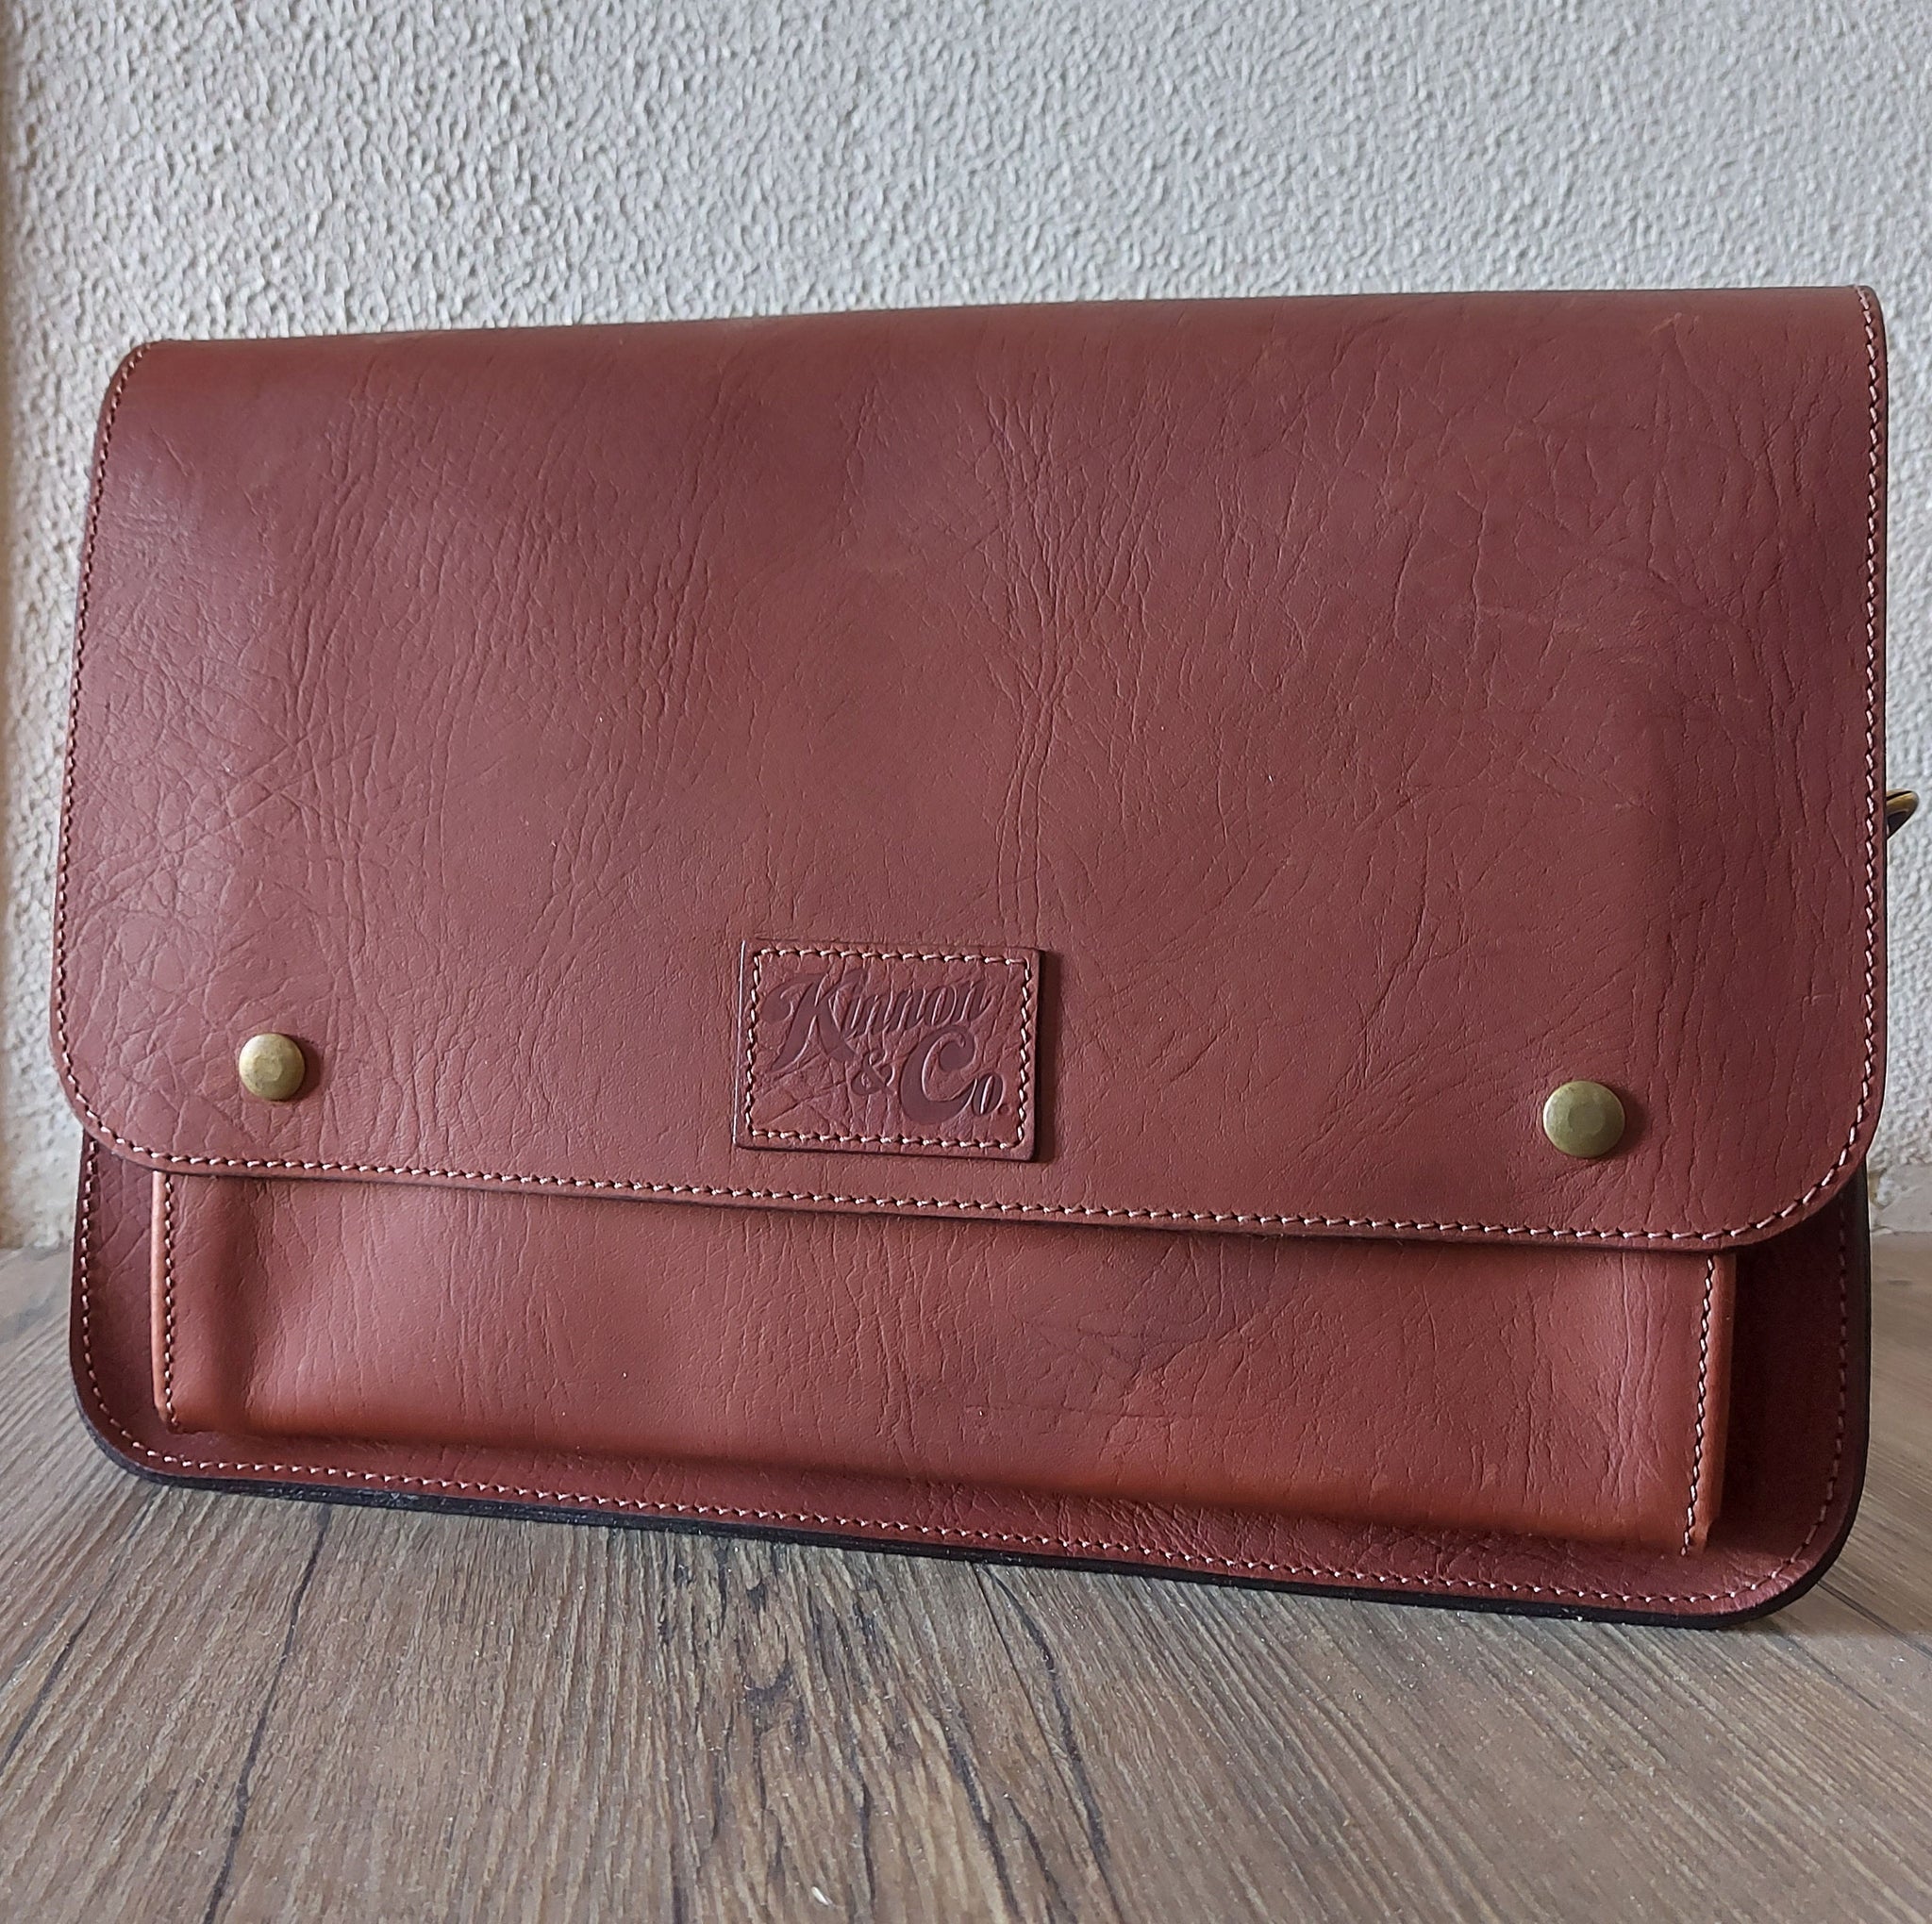 Kinnon and Co branded tan leather Document case 